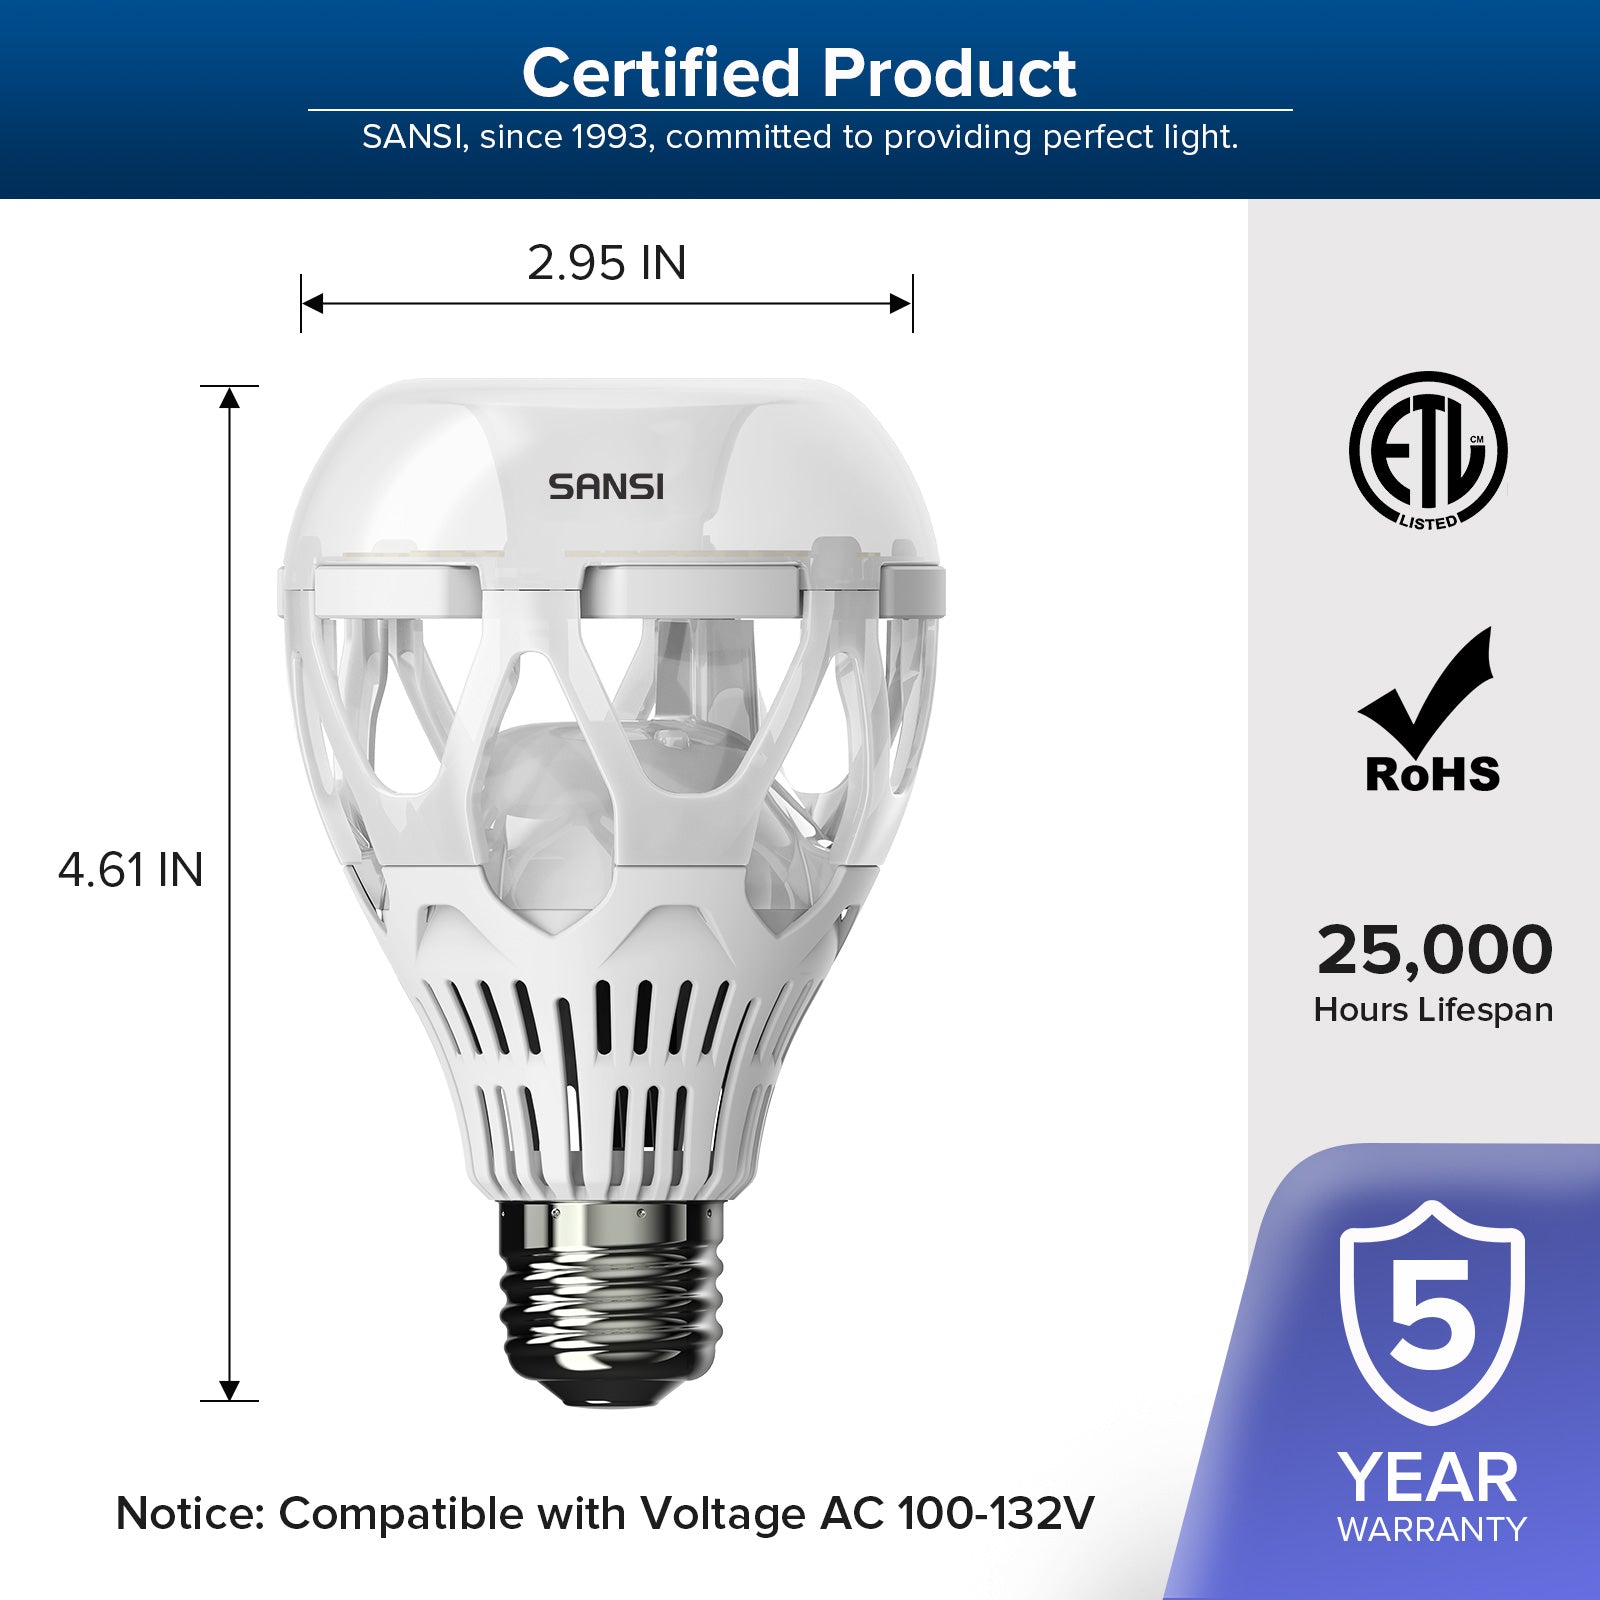 A21 18W led light bulb has ROHS certification, 25,000 hours lifespan, 5-year warranty